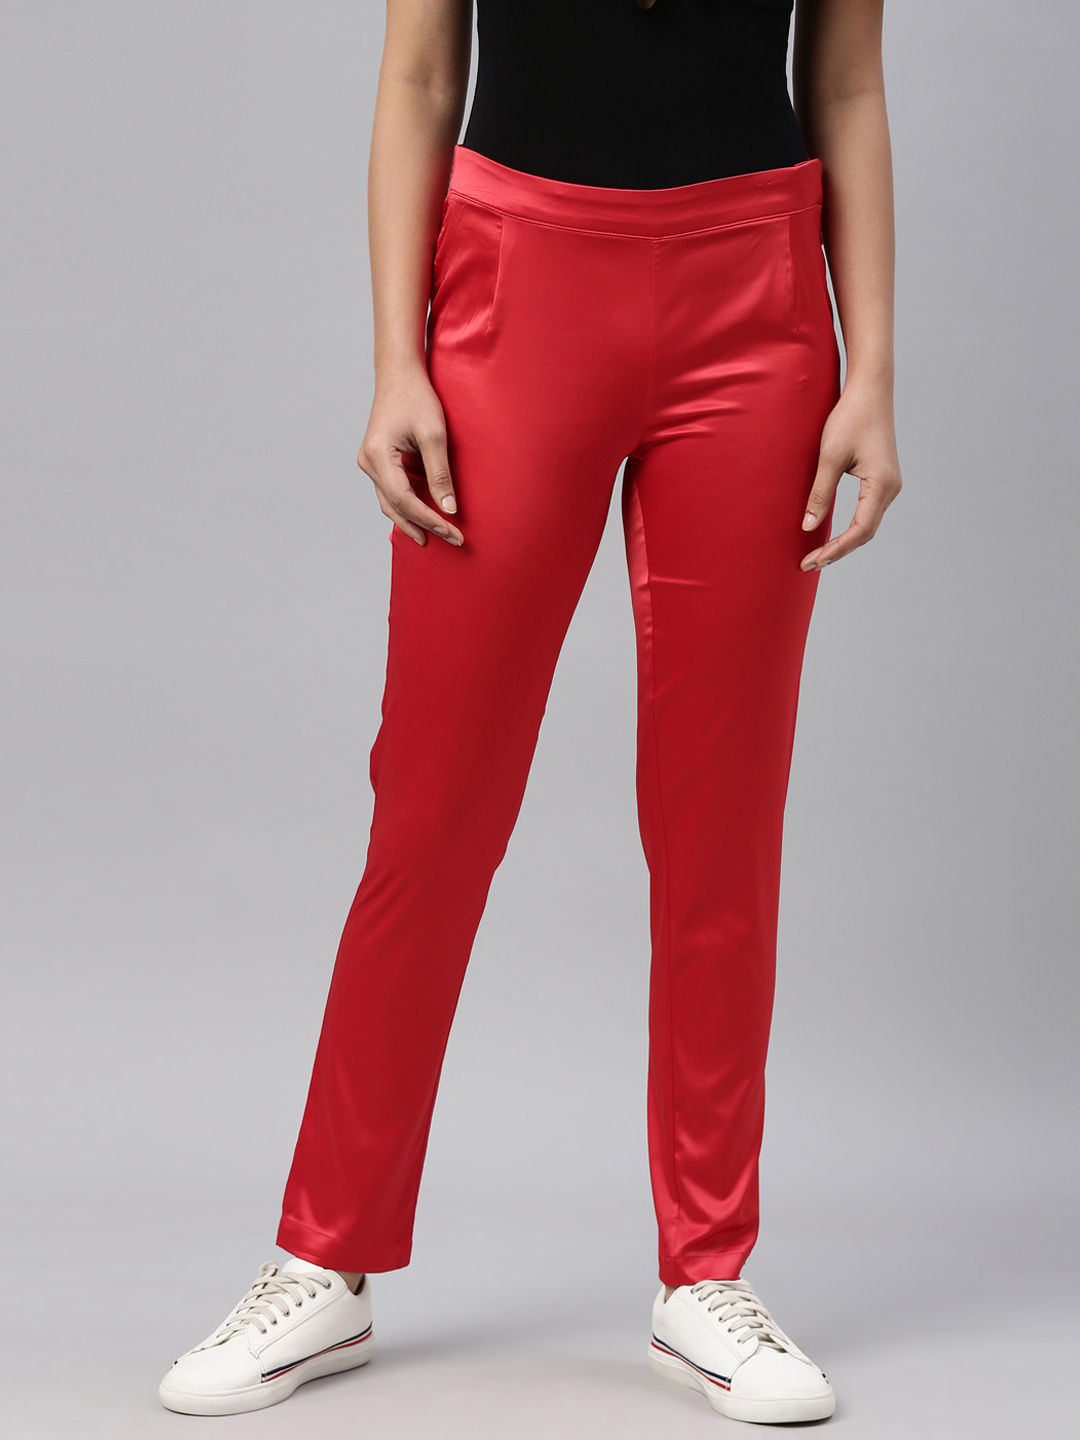 Go Colors Women Dark Solid Polyester Mid Rise Shiny Pants  Red Buy Go  Colors Women Dark Solid Polyester Mid Rise Shiny Pants  Red Online at Best  Price in India  Nykaa